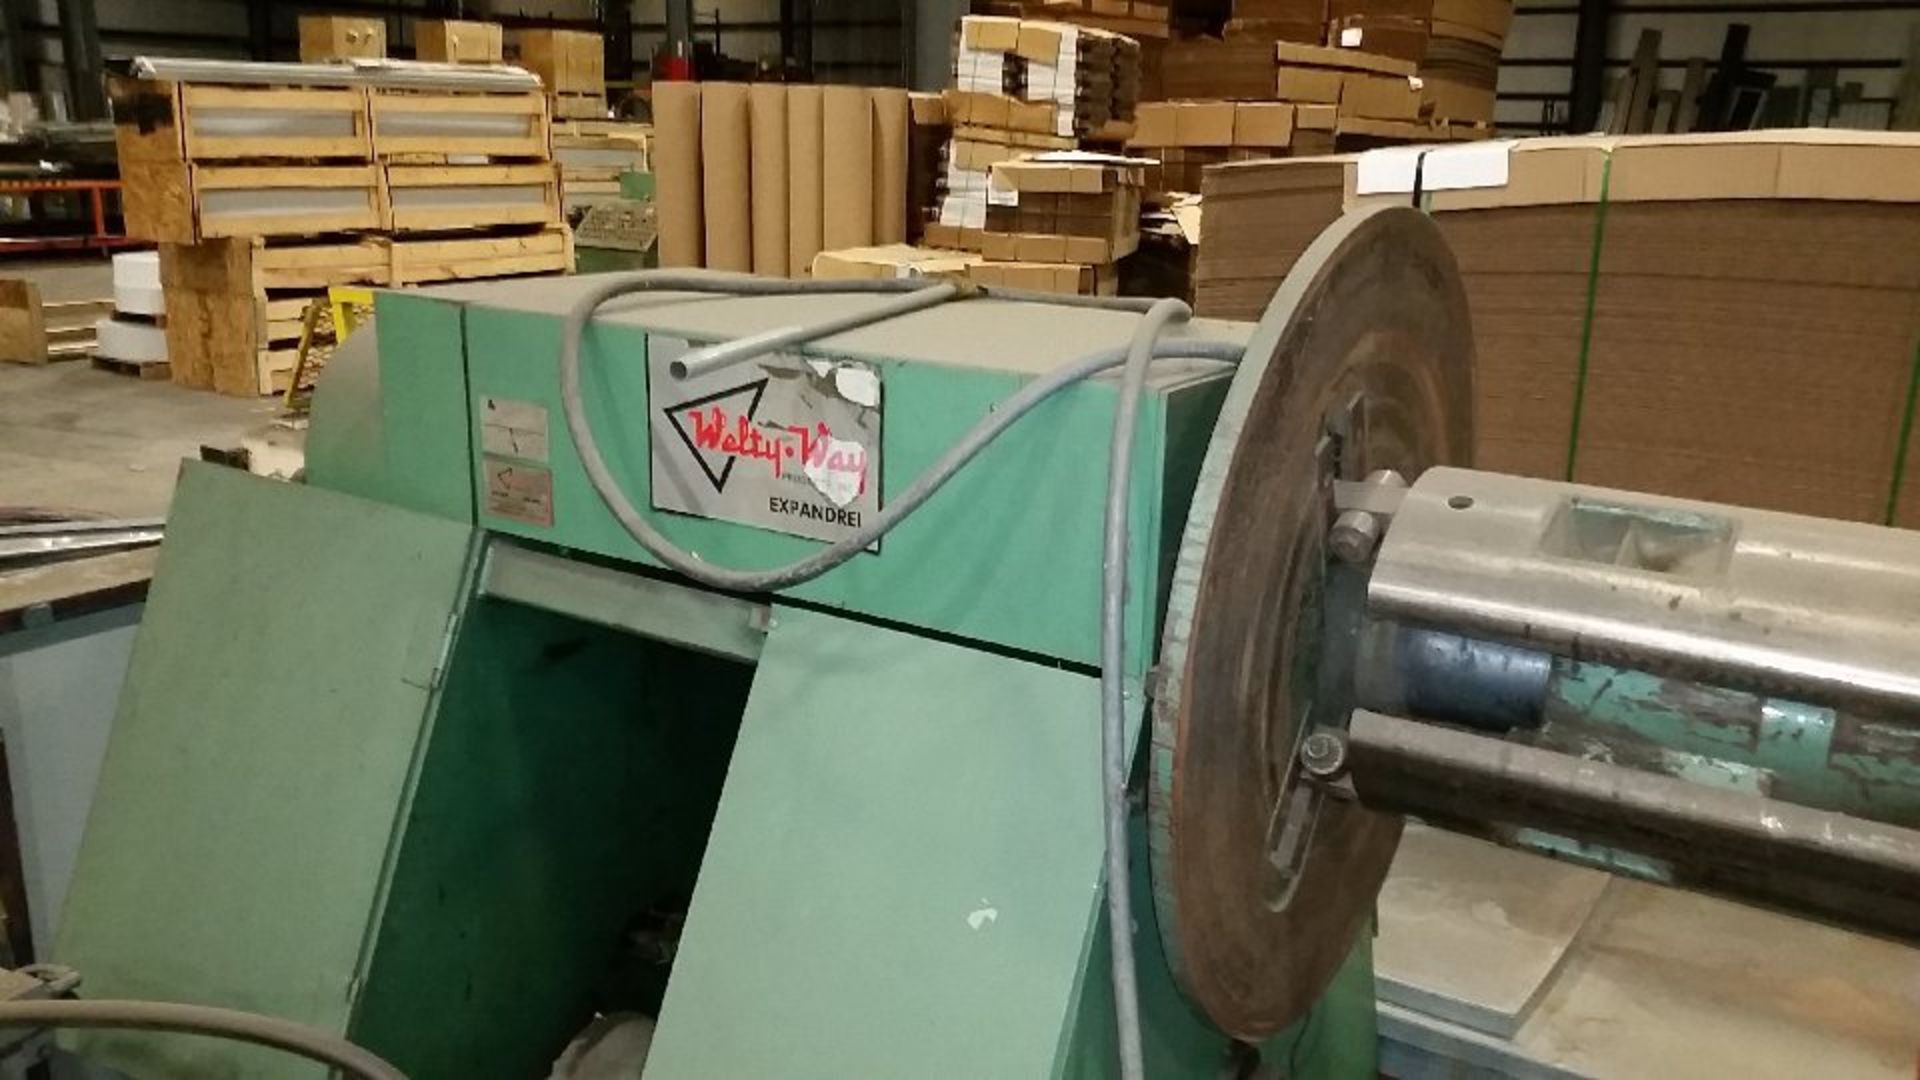 Welty Way Expanding Mandrel Coil Roller, Mdl. 20M60, s/n UC7648 (This item located Allentown, PA) - Image 4 of 4